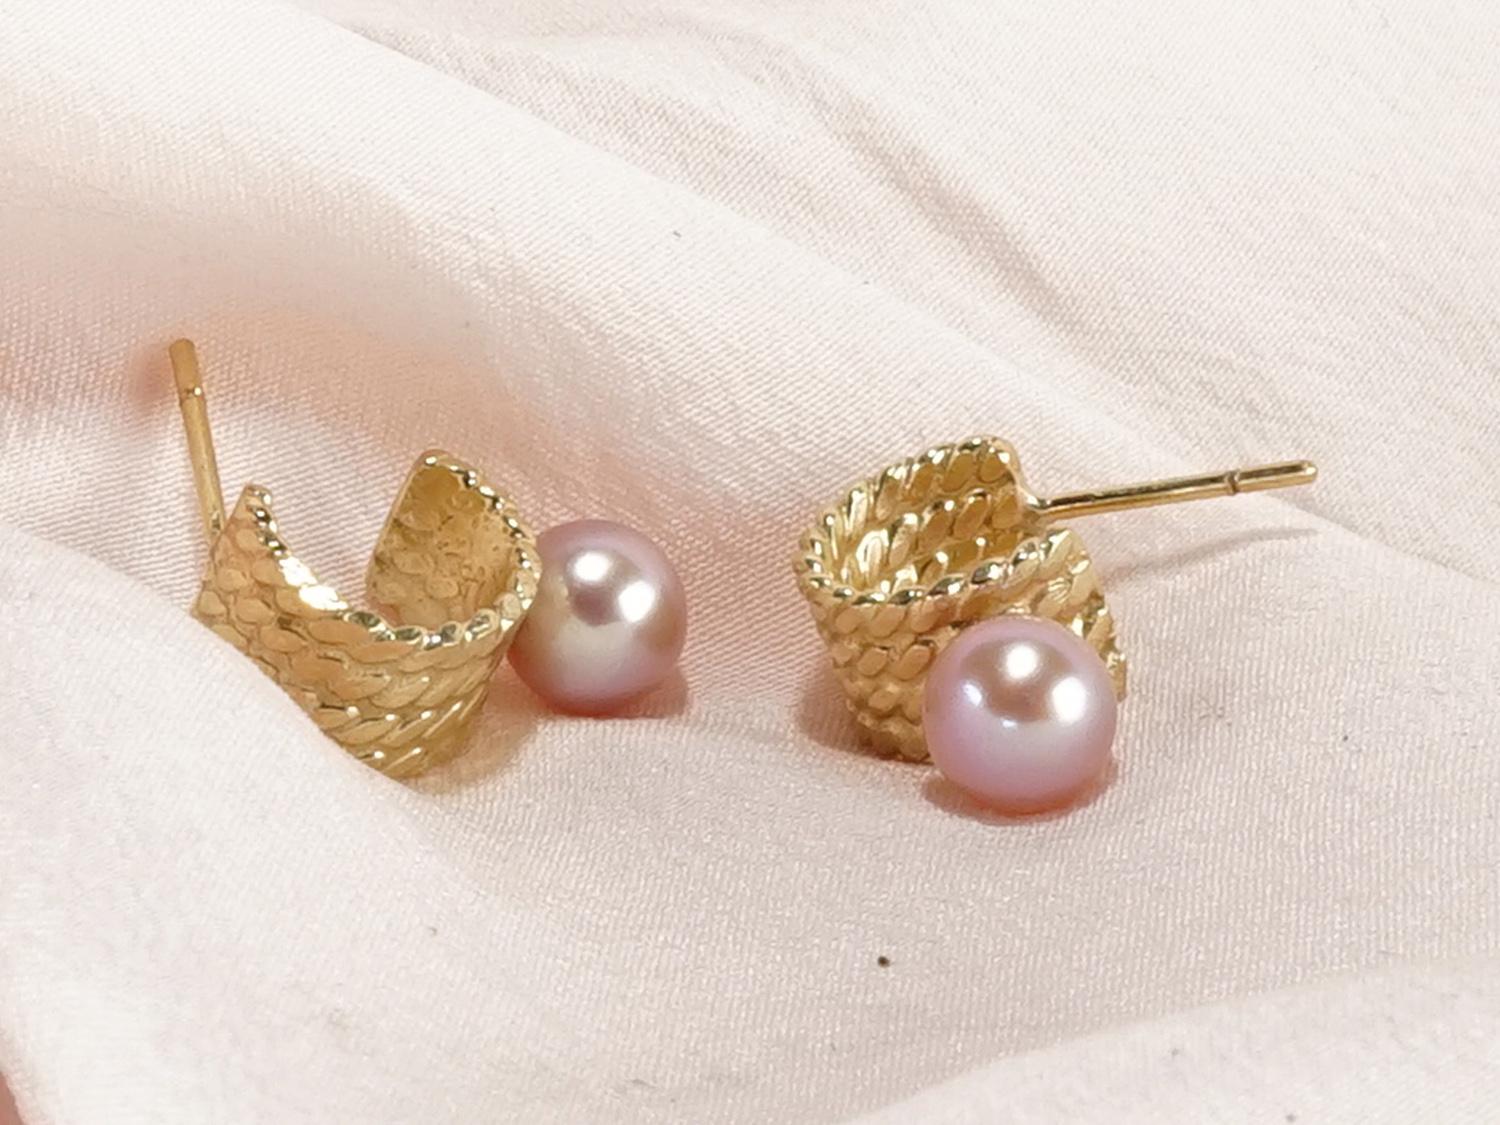 Reina 14K Recycled Yellow Gold Freshwater Pearl Earring by Mon Pilar.

Feminine and unique, these braided hoops are the perfect alternative to the classic pearl earring. Meant to fit just below the earlobe, they feature large freshwater pearls in a